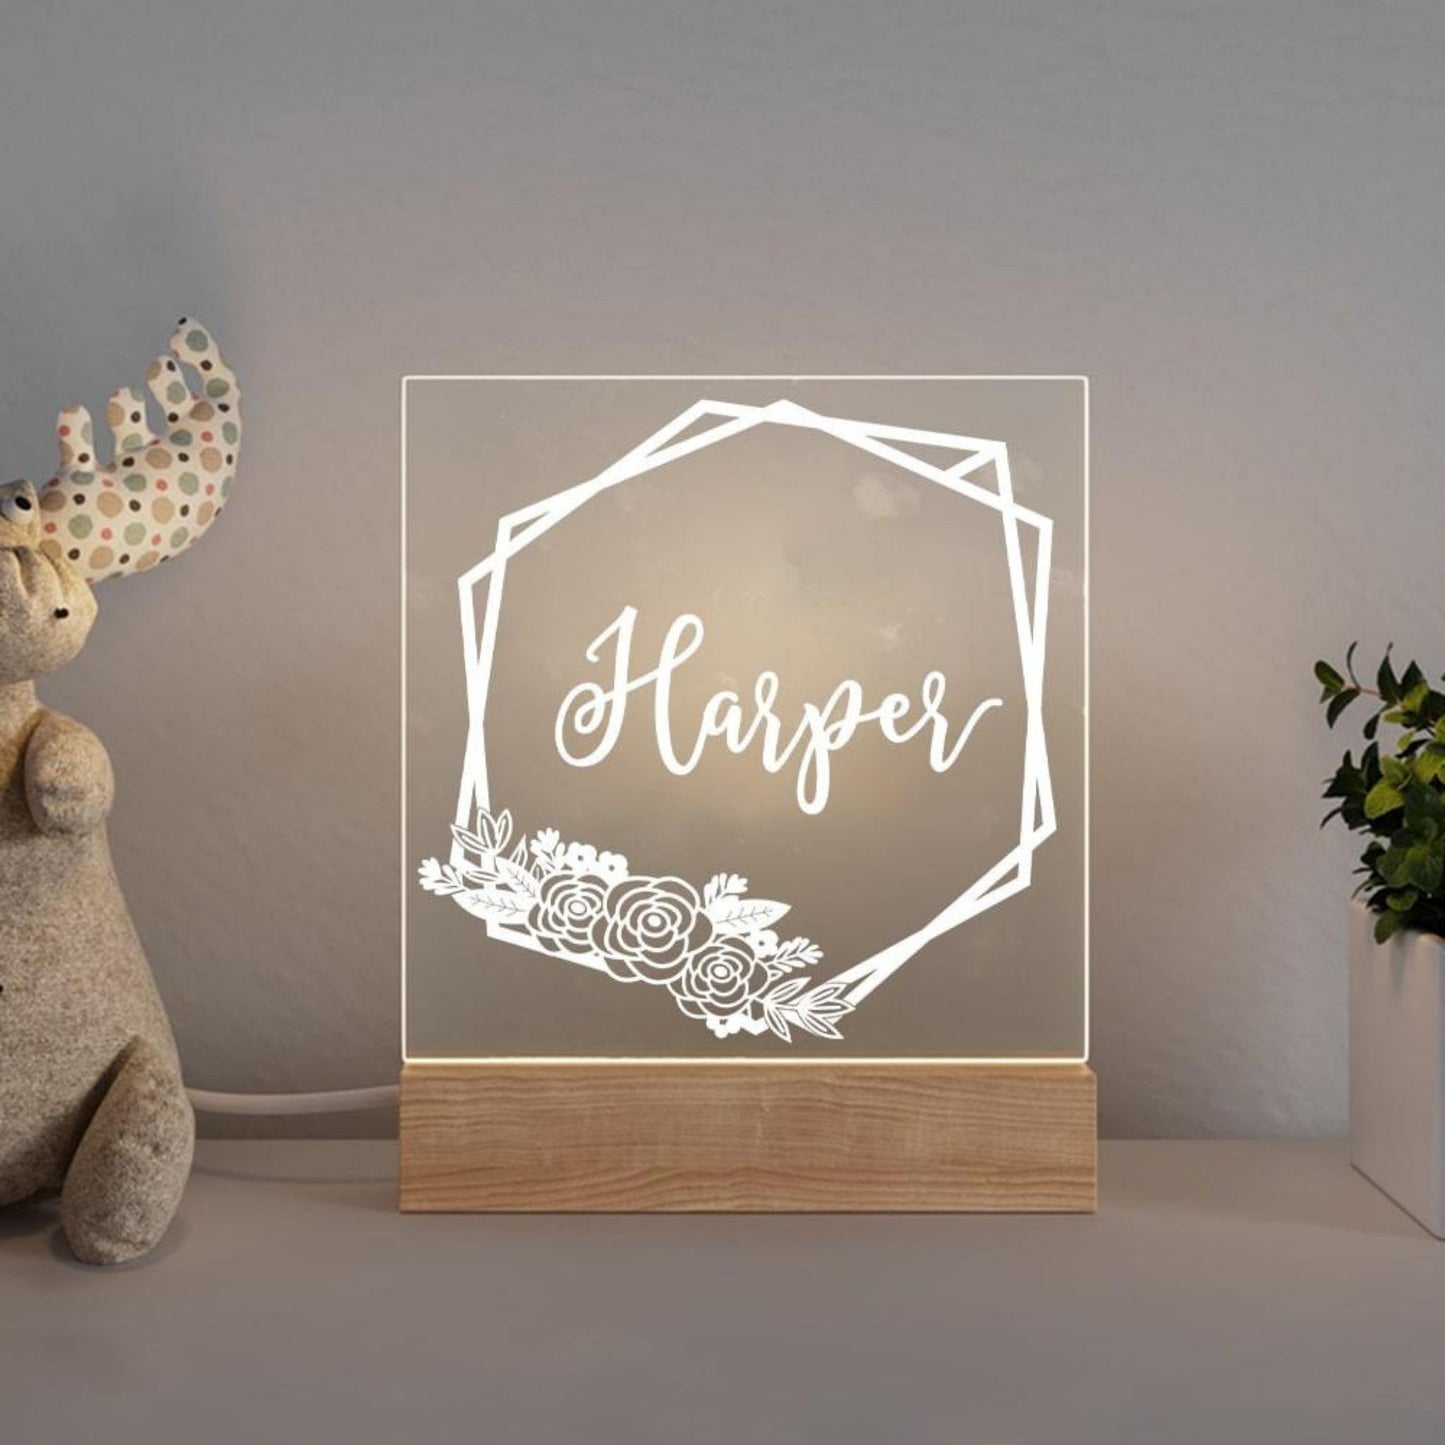 Personalized night light for kids nursery | Flowers night light with name | Hunny Bubba Kids